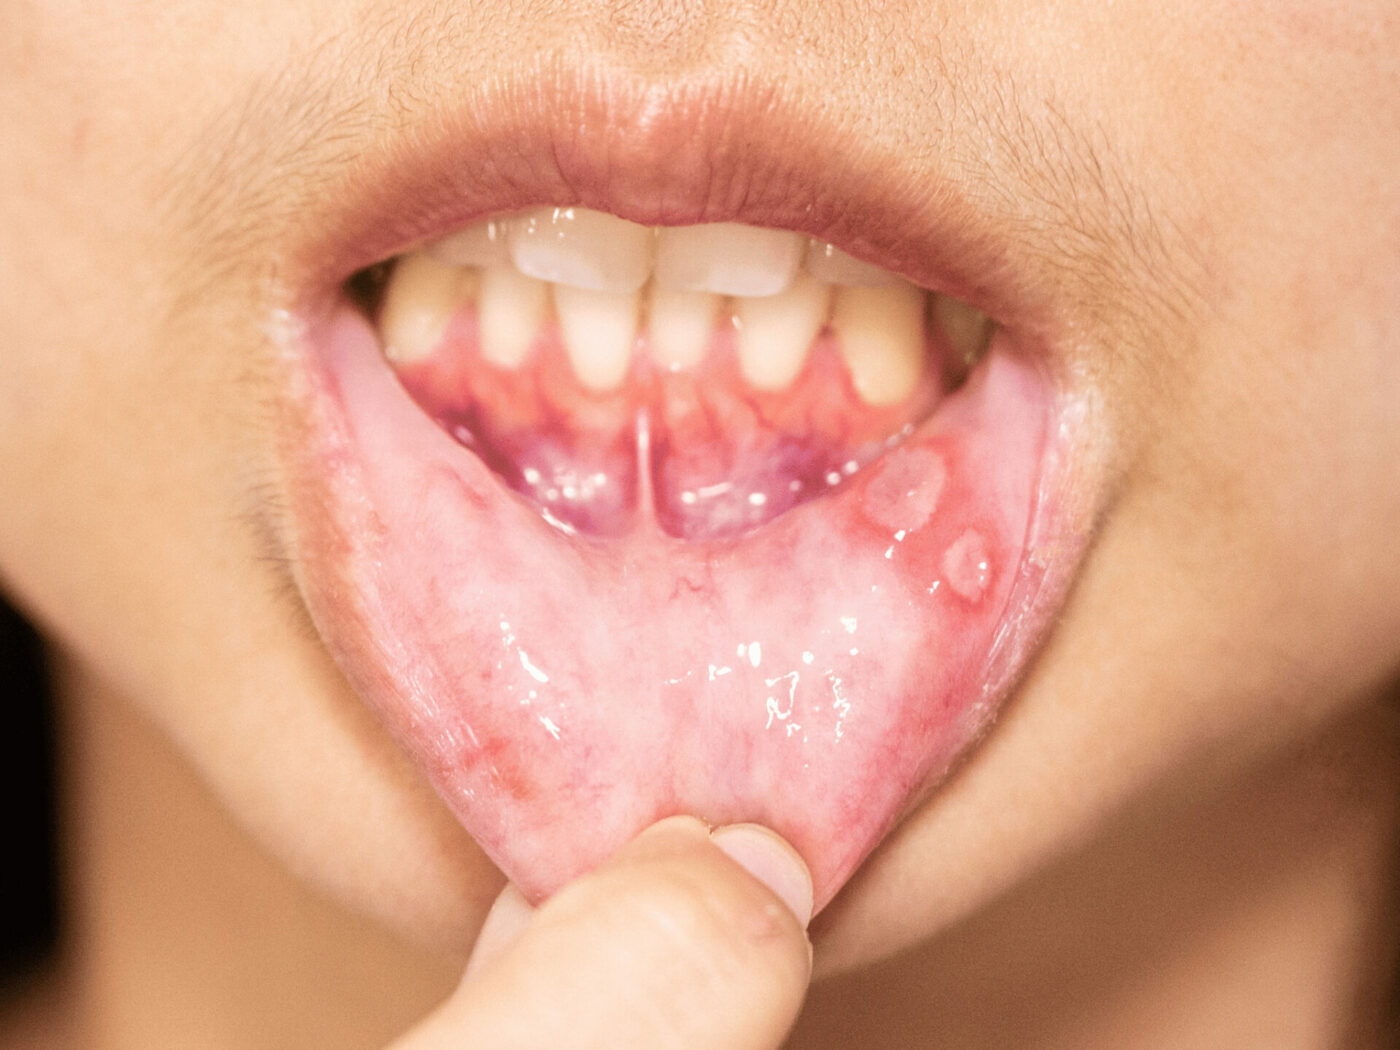 Person pulls down lower lip depicting mouth inflammation